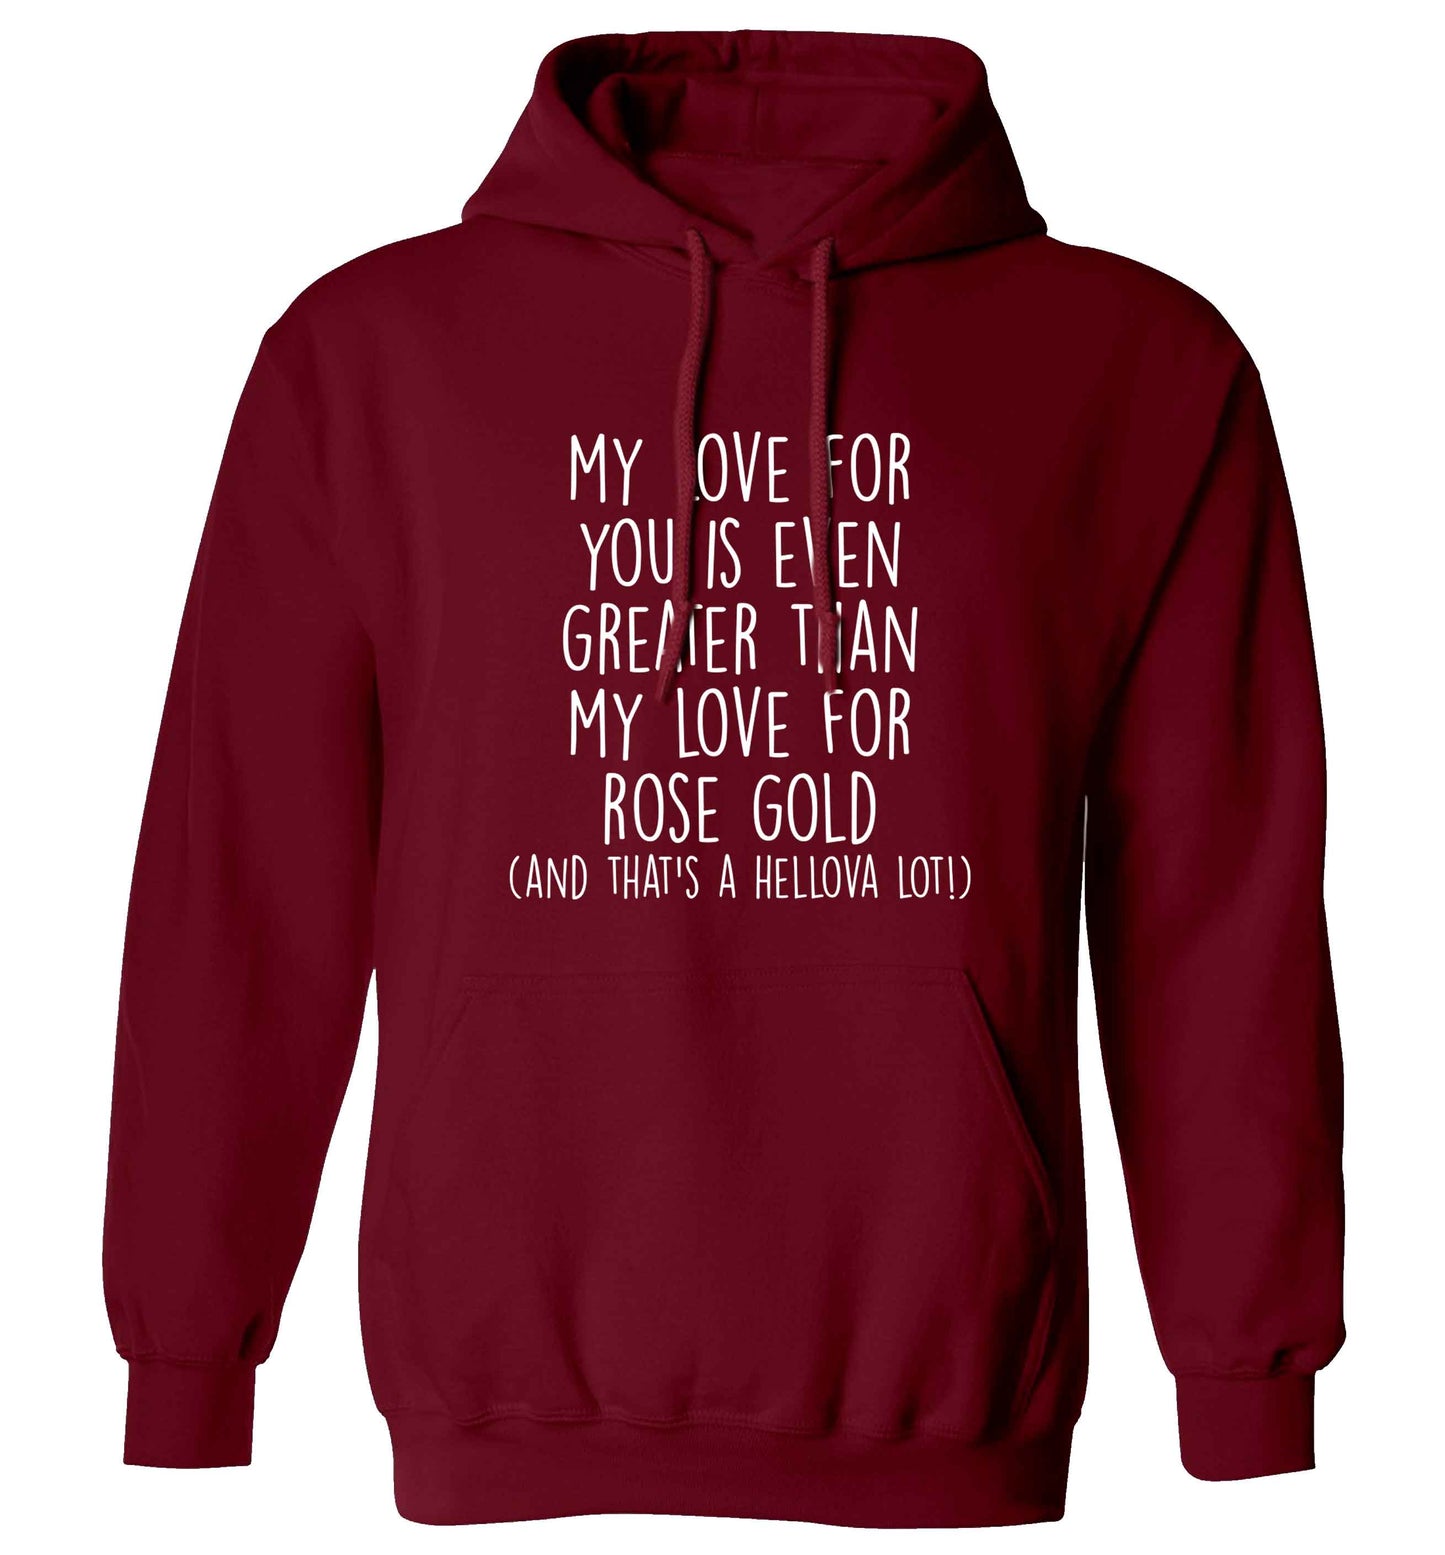 My love for you is even greater than my love for rose gold (and that's a hellova lot) adults unisex maroon hoodie 2XL